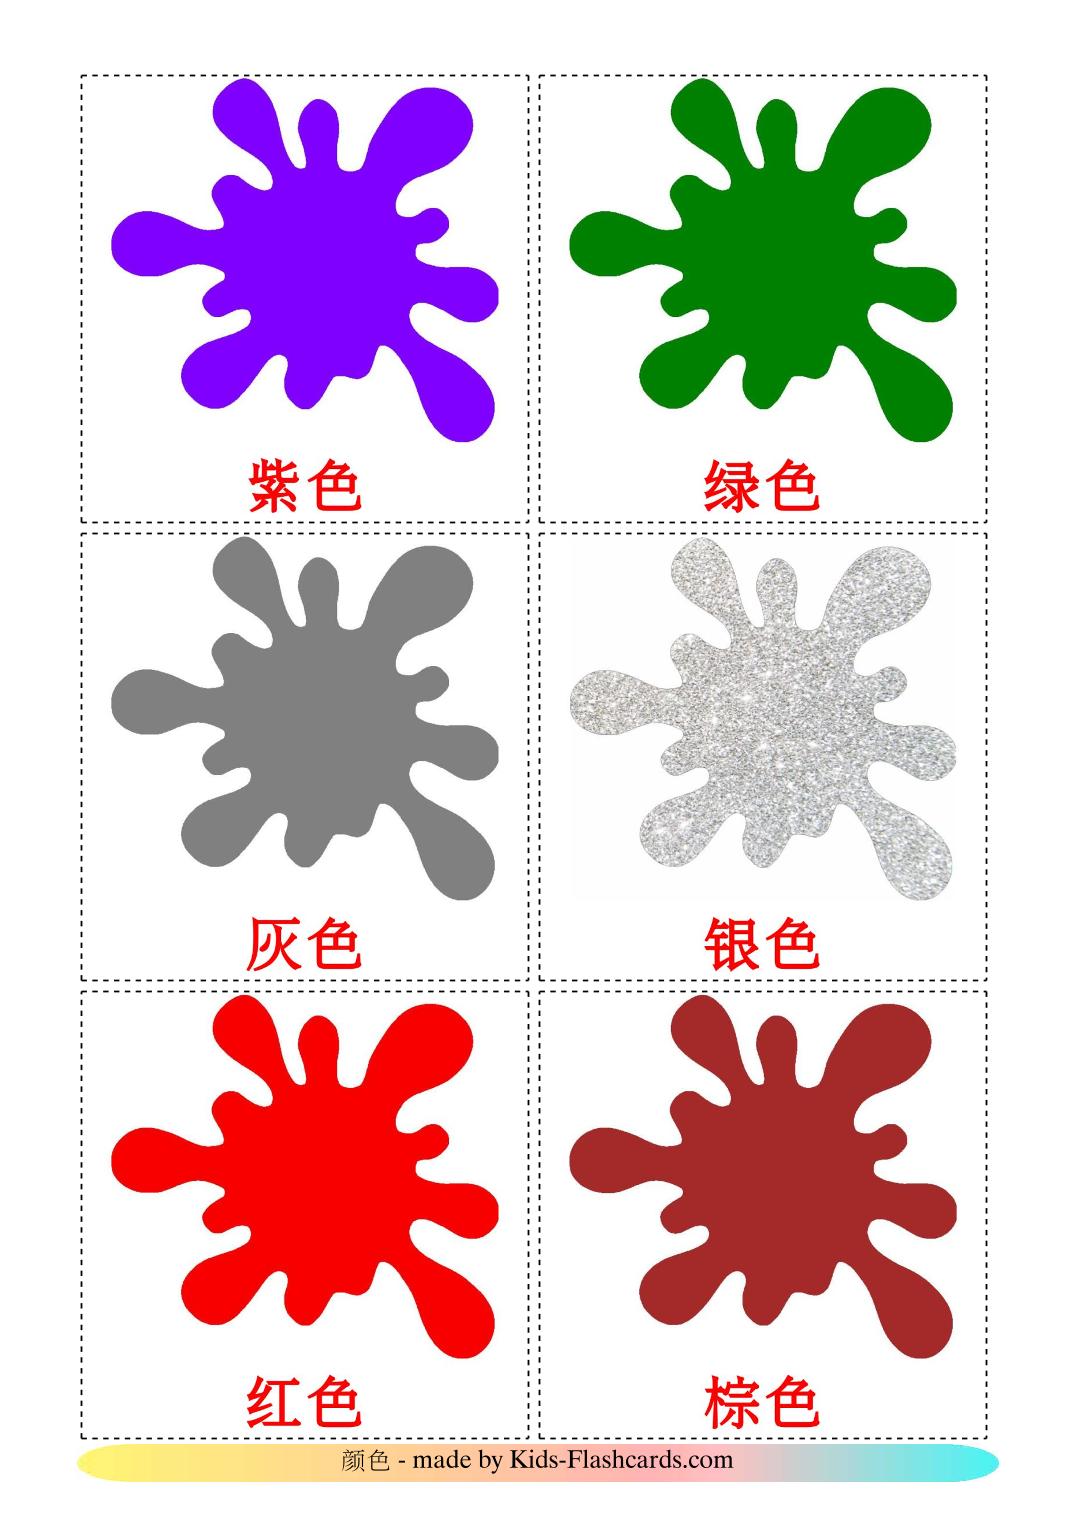 Base colors - 12 Free Printable chinese(Simplified) Flashcards 